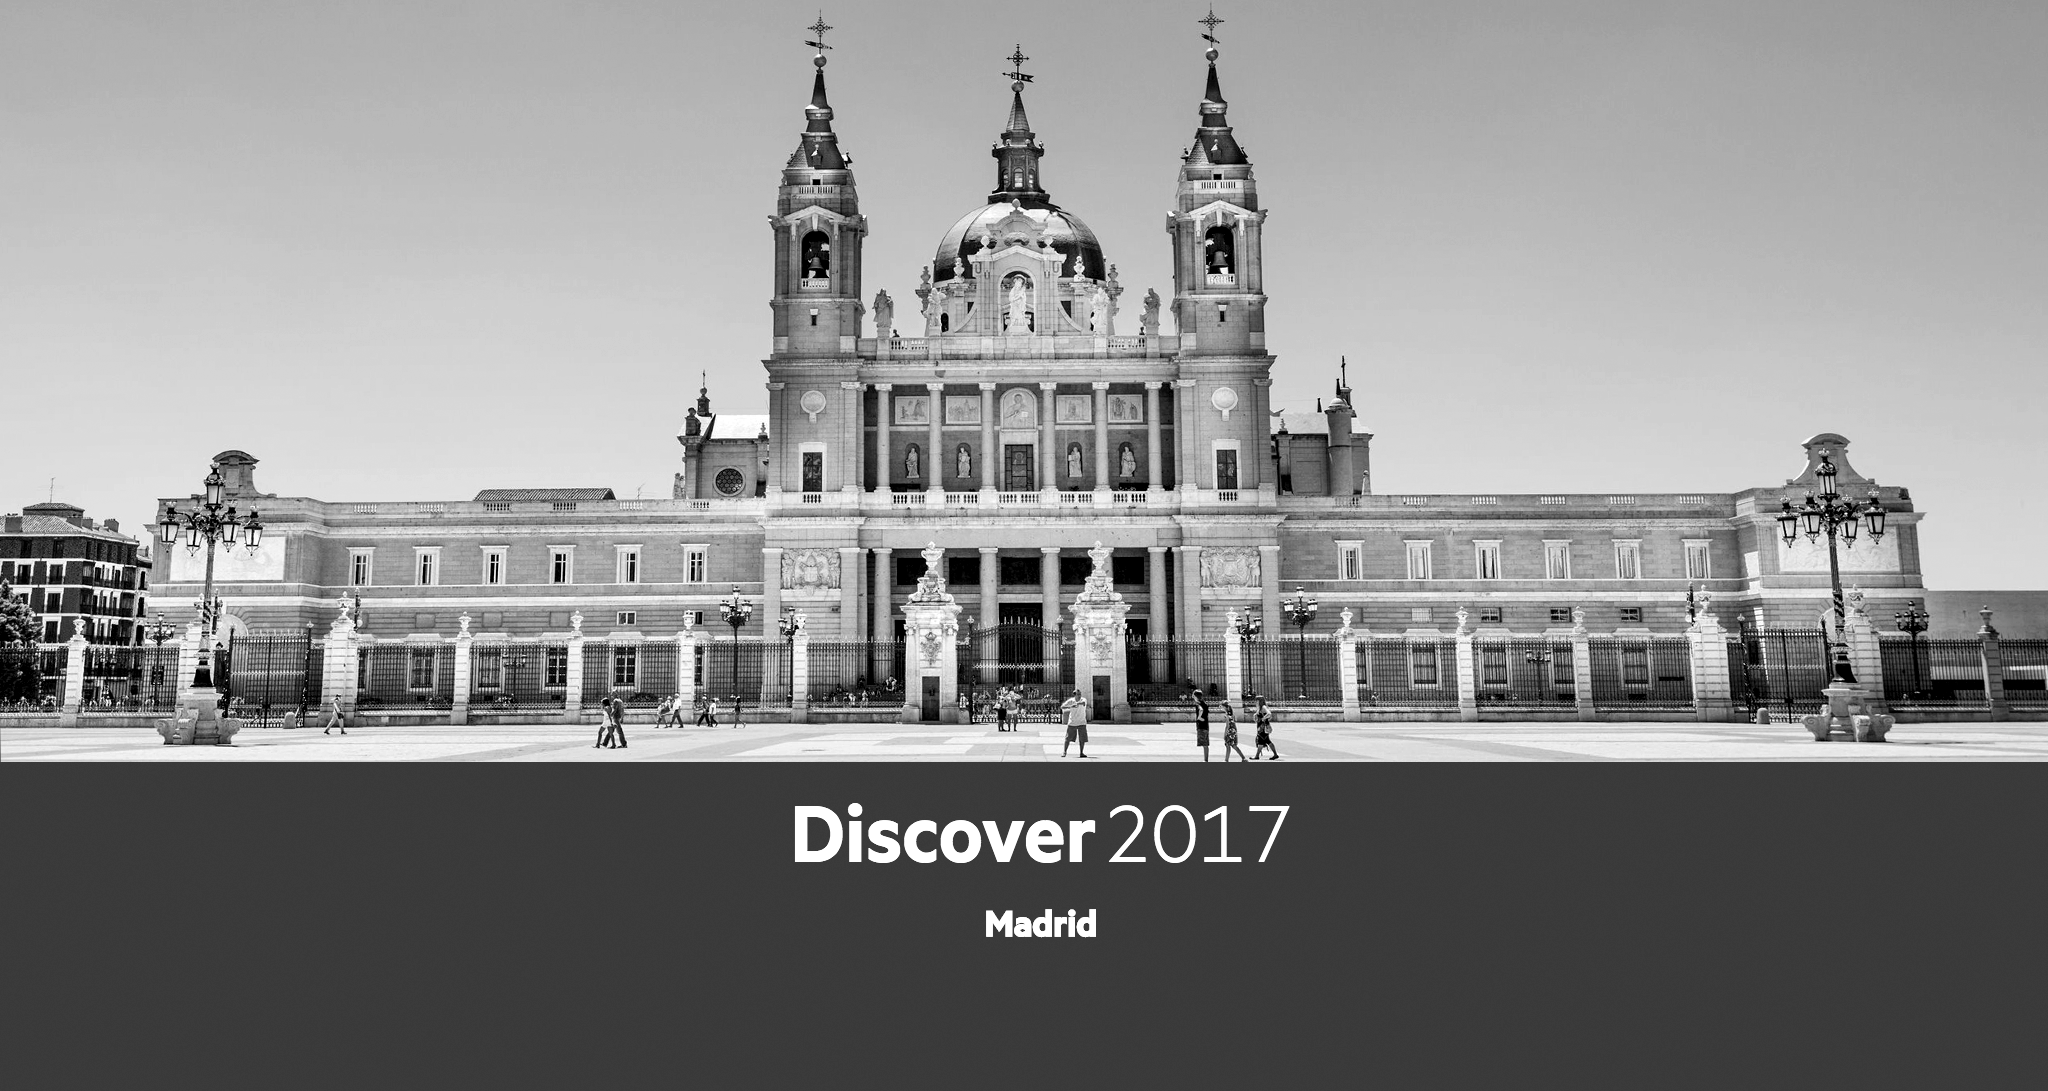 Come See Us at HPE Discover 2017 Madrid